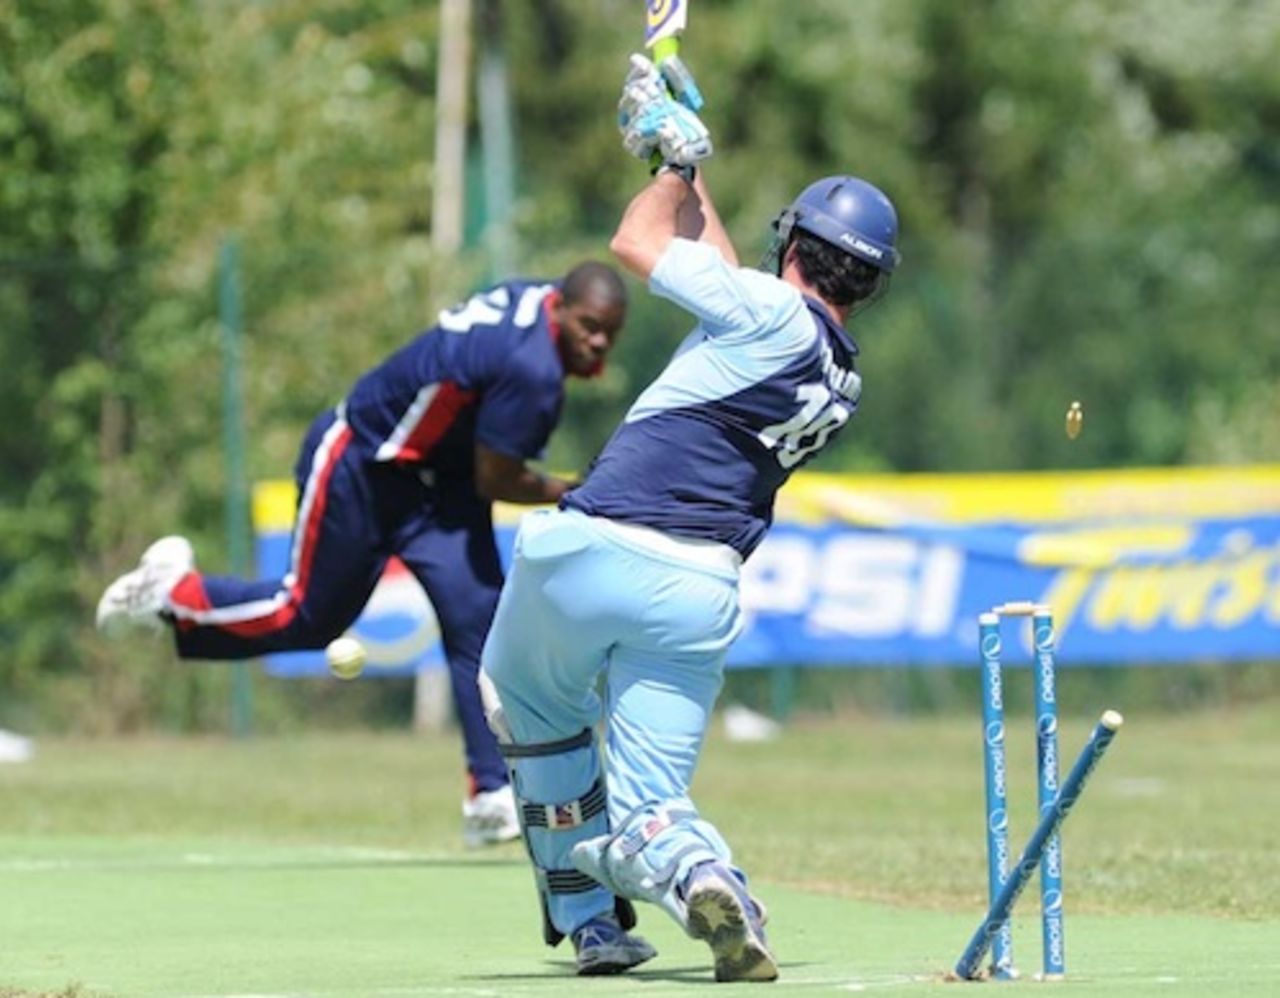 Lucas Paterlini is bowled by Marlon Bryan, Argentina v Cayman Islands, ICC World Cricket League Division Four, Pianoro, August 16, 2010